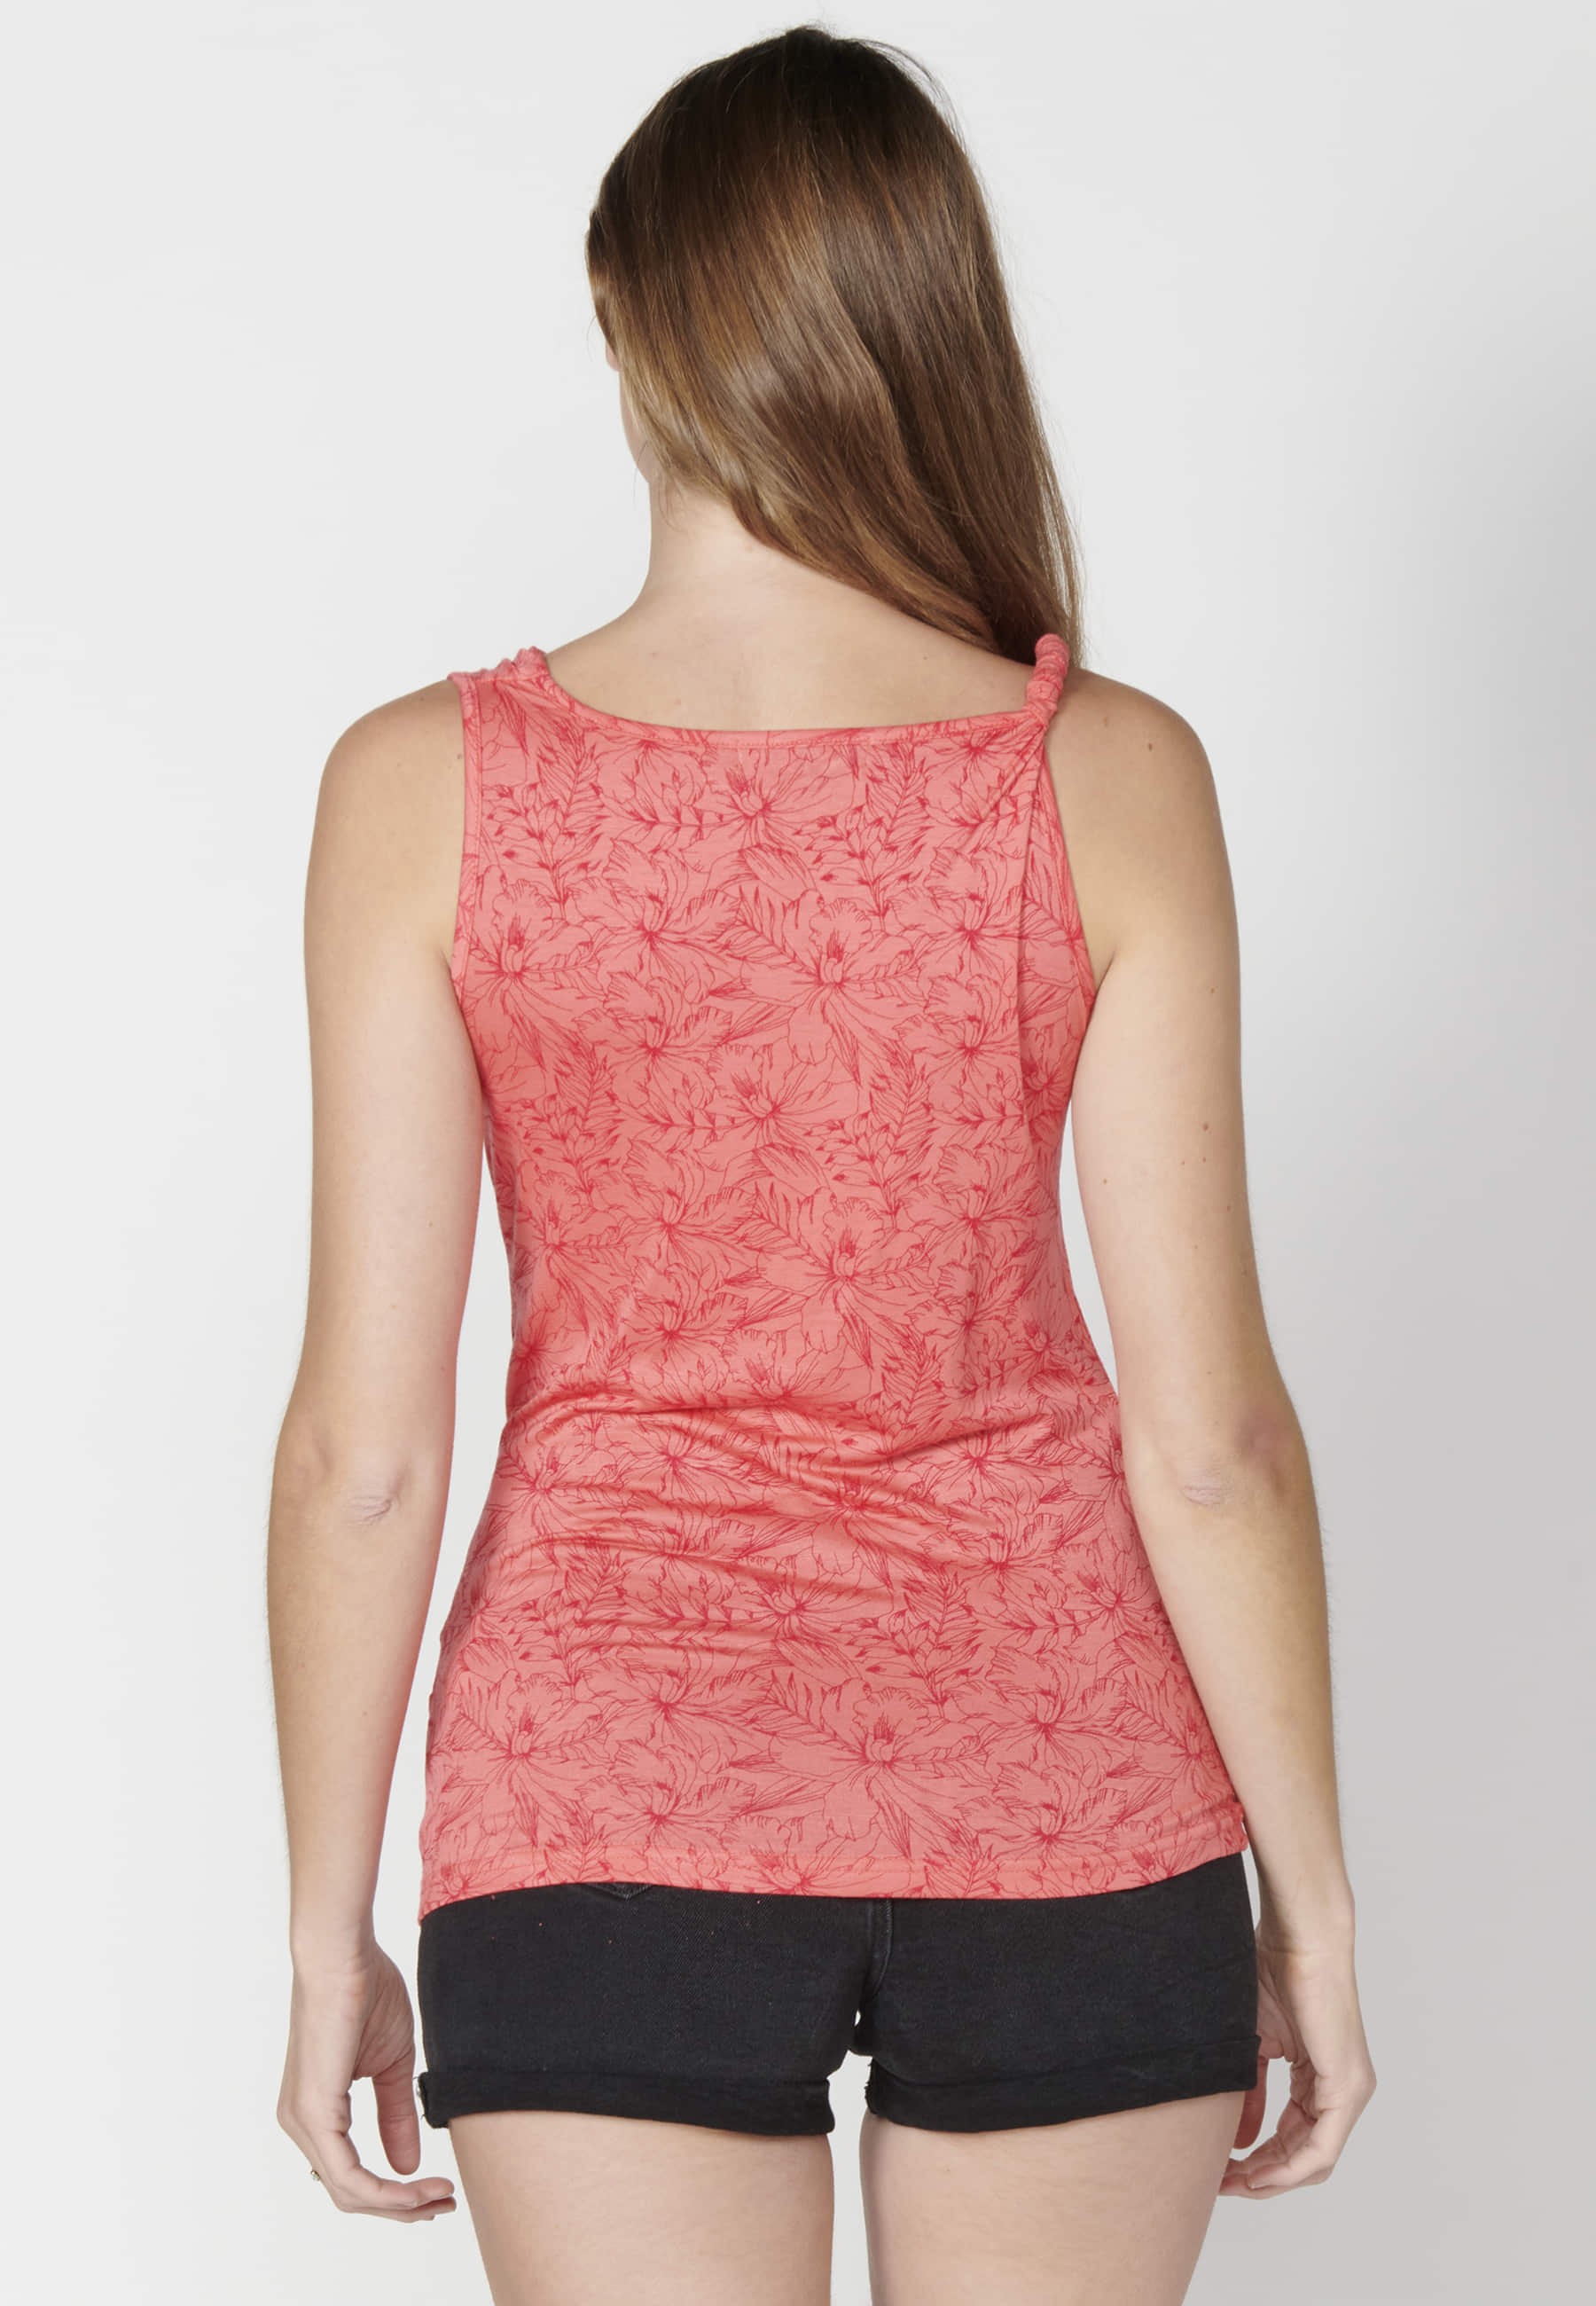 Coral floral print tank top with loose neckline for Woman 6